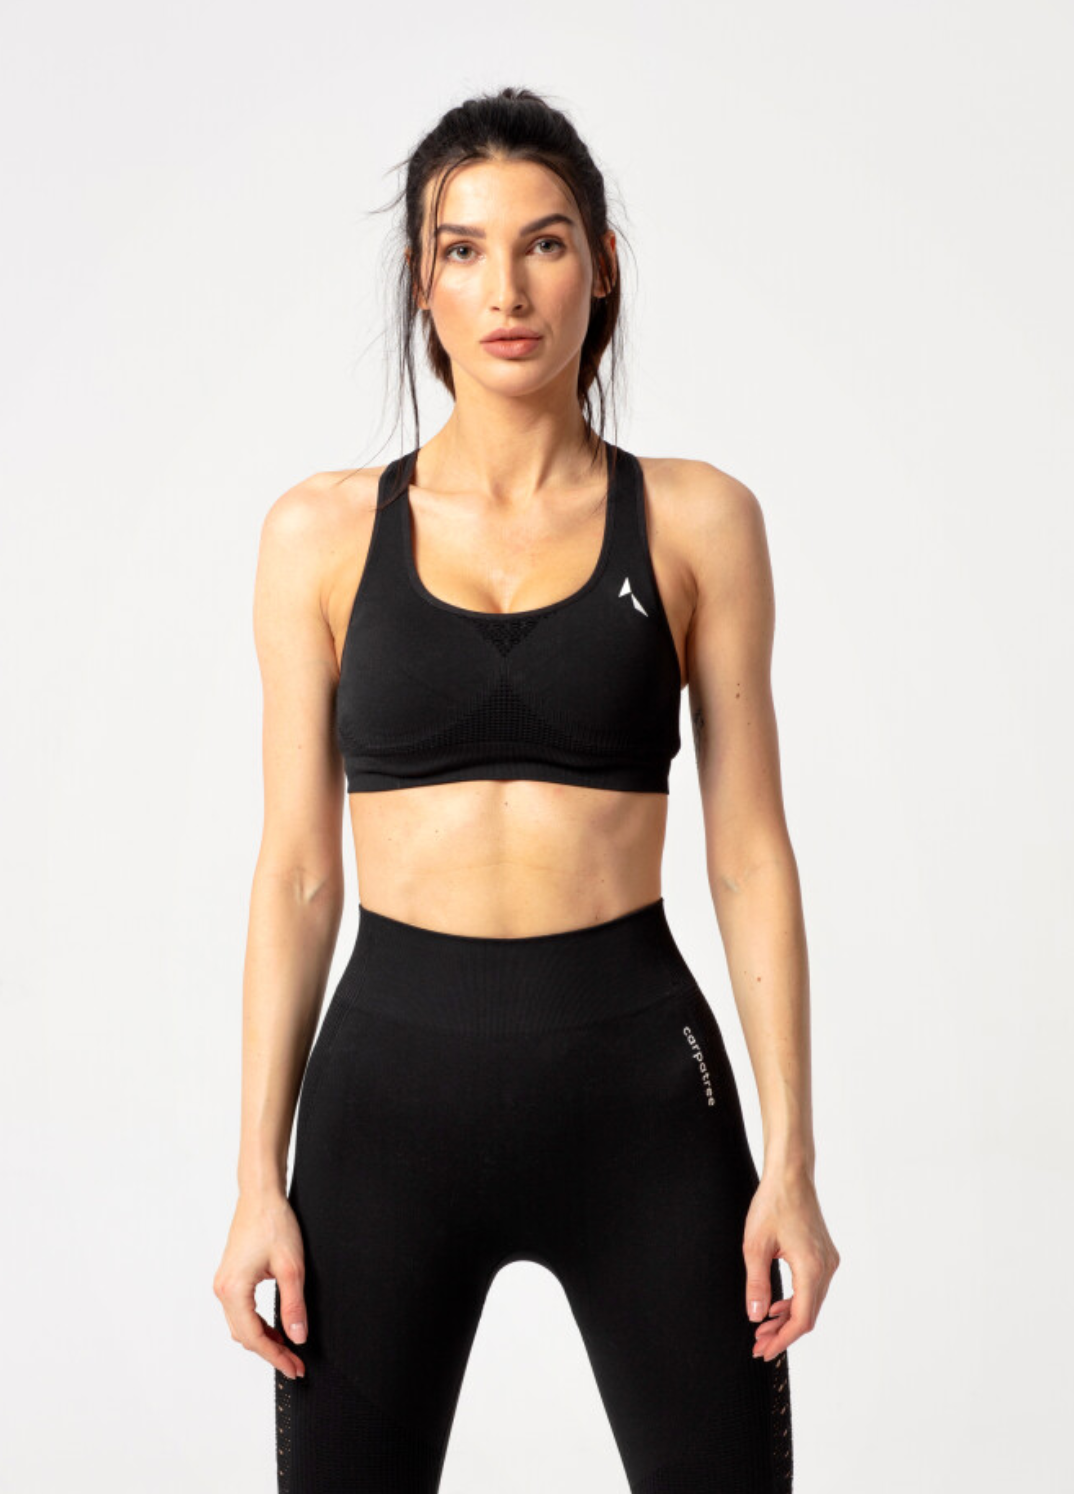 Carpatree Phase Seamless Bra - Black seamless sports bra with removable padding and razor back with crochet style detail.